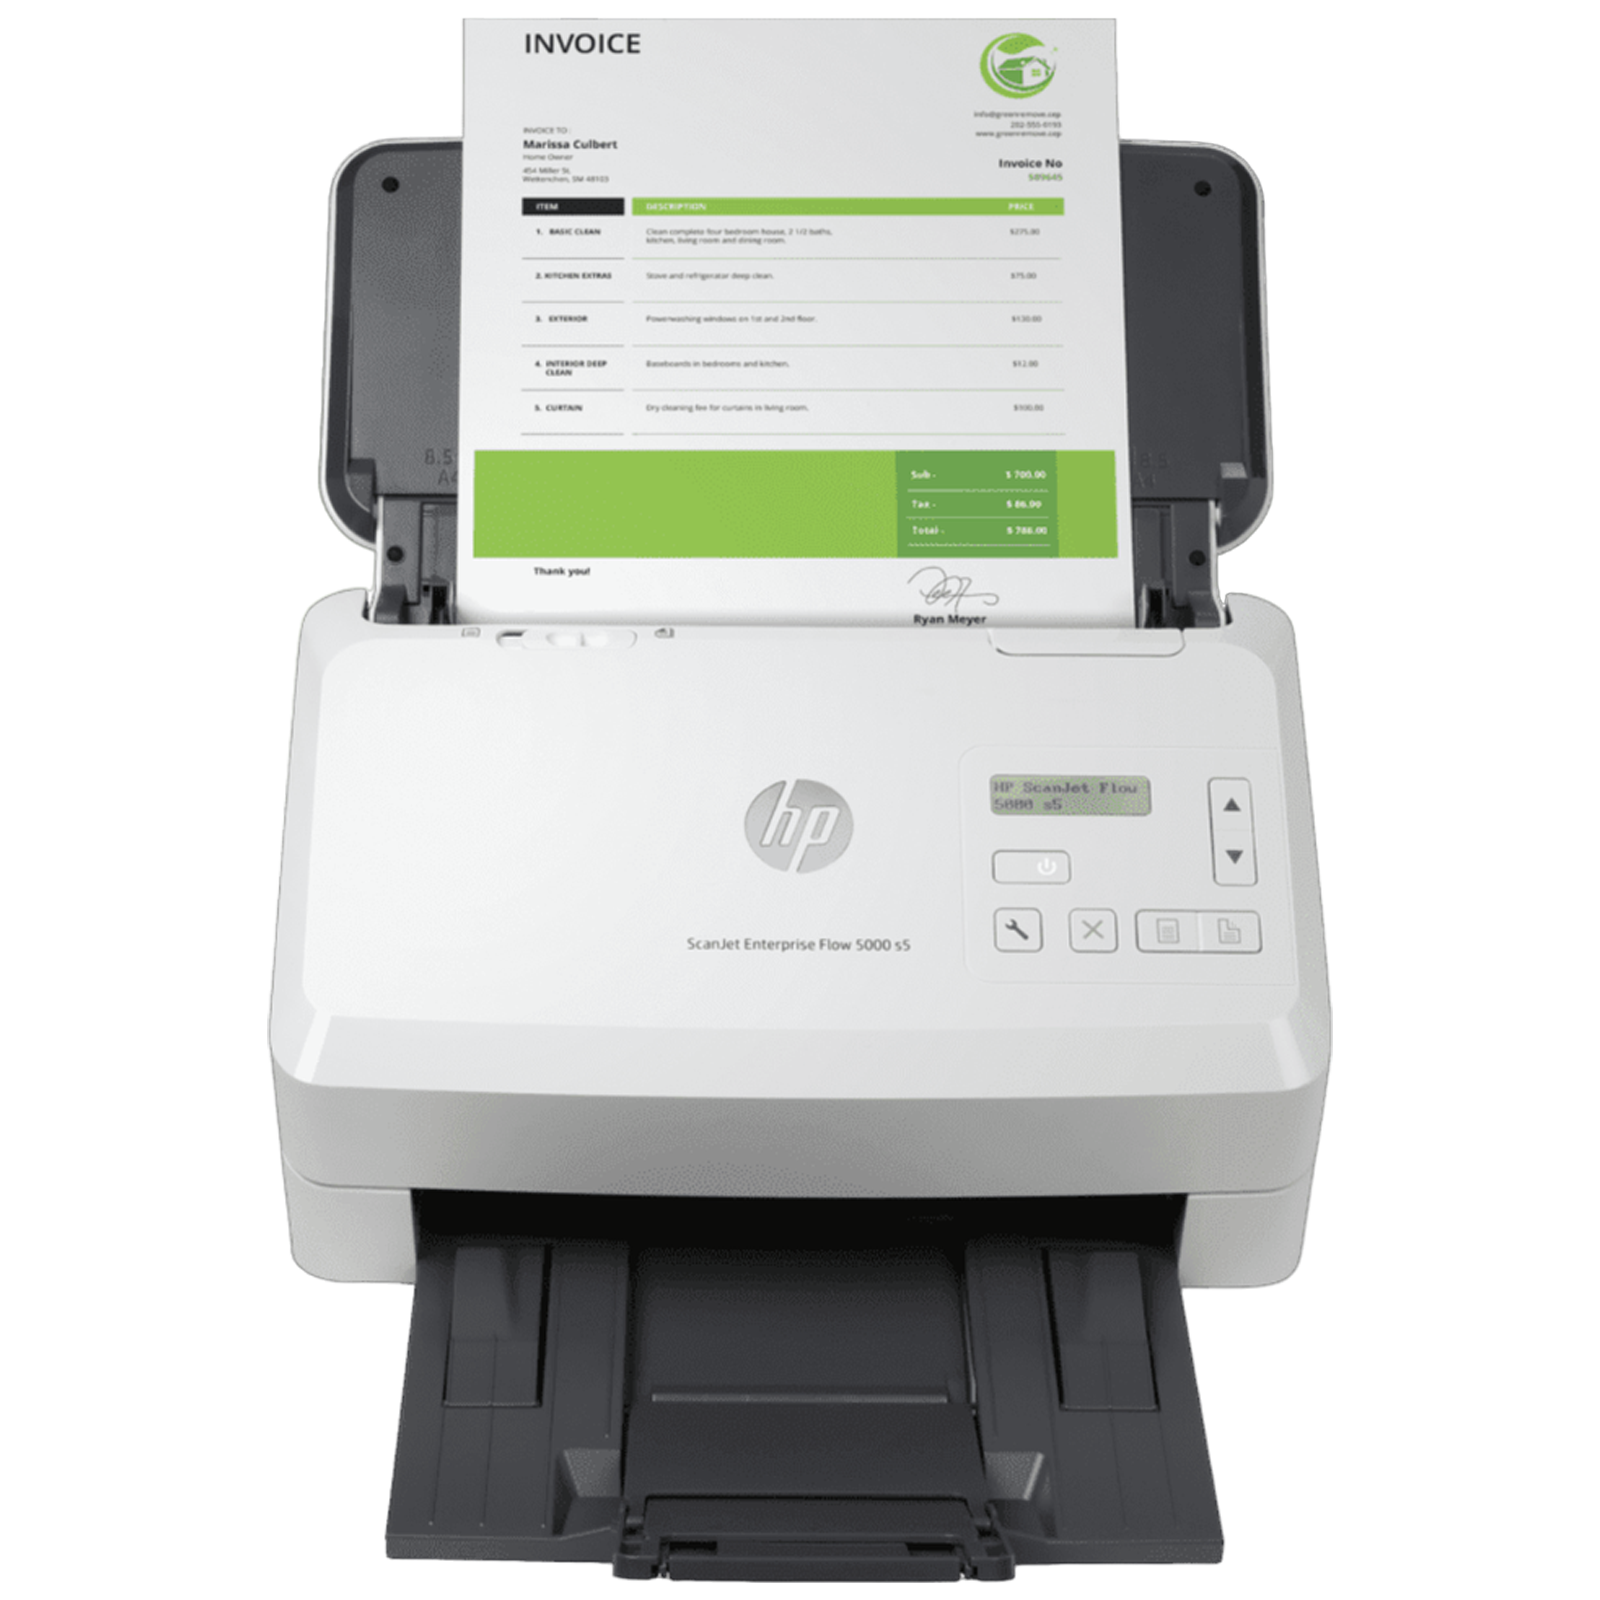 HP ScanJet 5000 Sheetfed Scanner (Contact Image Sensor, 6FW09AACJ, White)